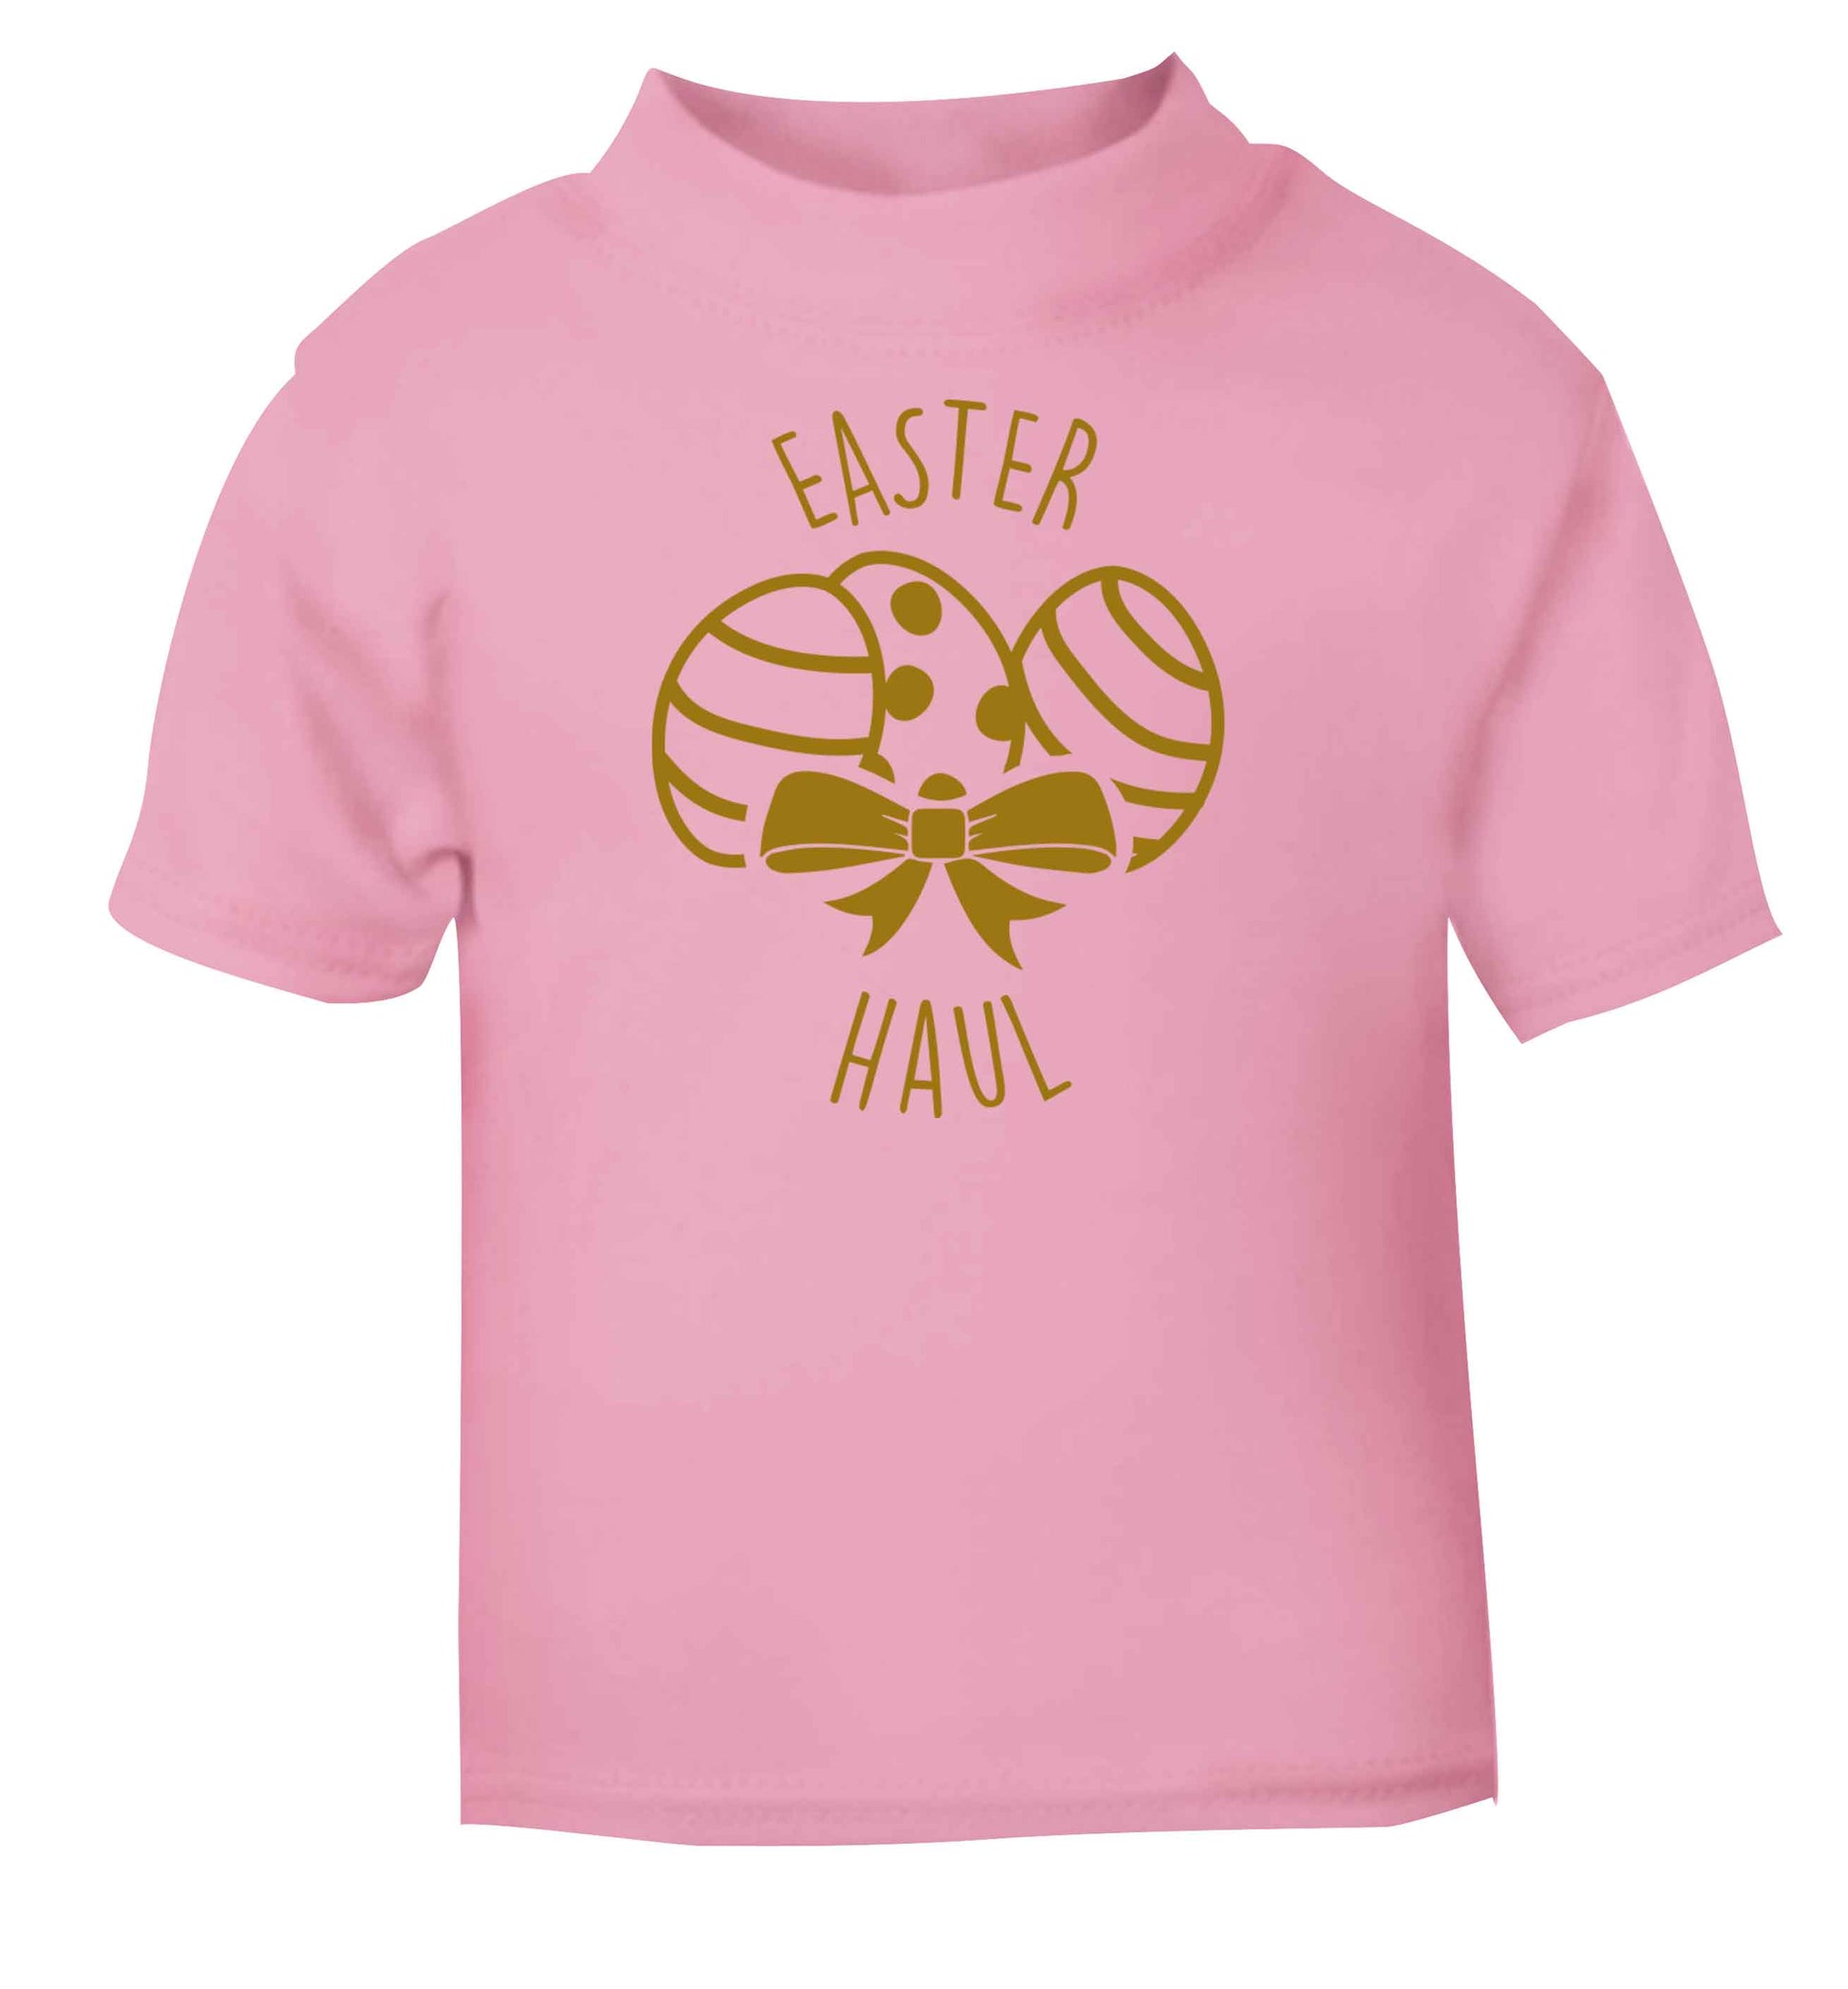 Easter haul light pink baby toddler Tshirt 2 Years